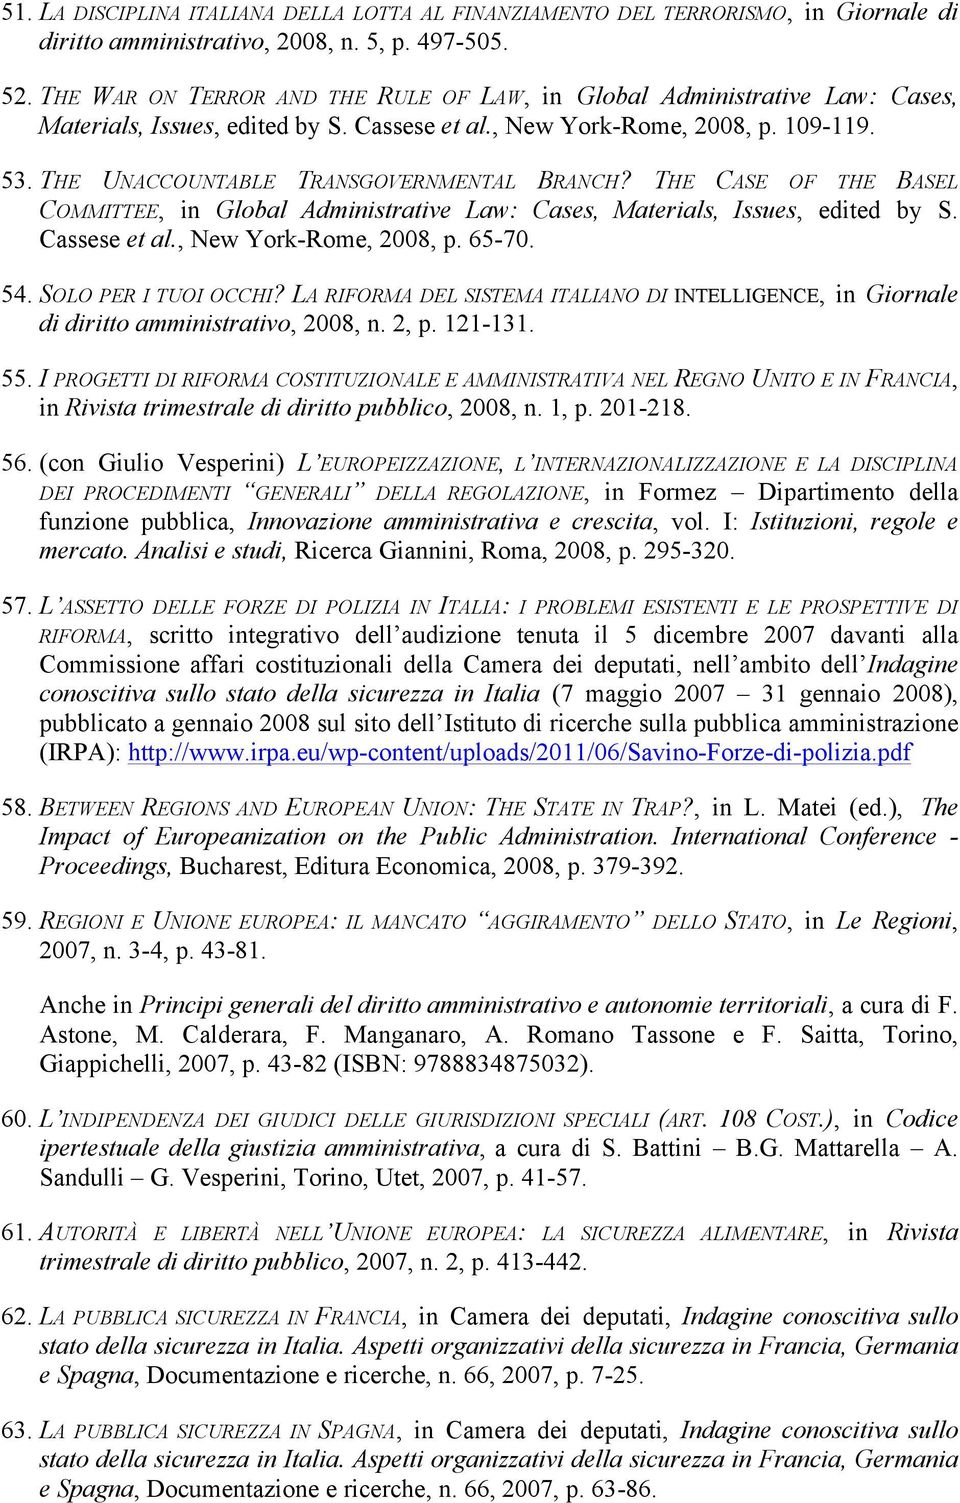 THE UNACCOUNTABLE TRANSGOVERNMENTAL BRANCH? THE CASE OF THE BASEL COMMITTEE, in Global Administrative Law: Cases, Materials, Issues, edited by S. Cassese et al., New York-Rome, 2008, p. 65-70. 54.